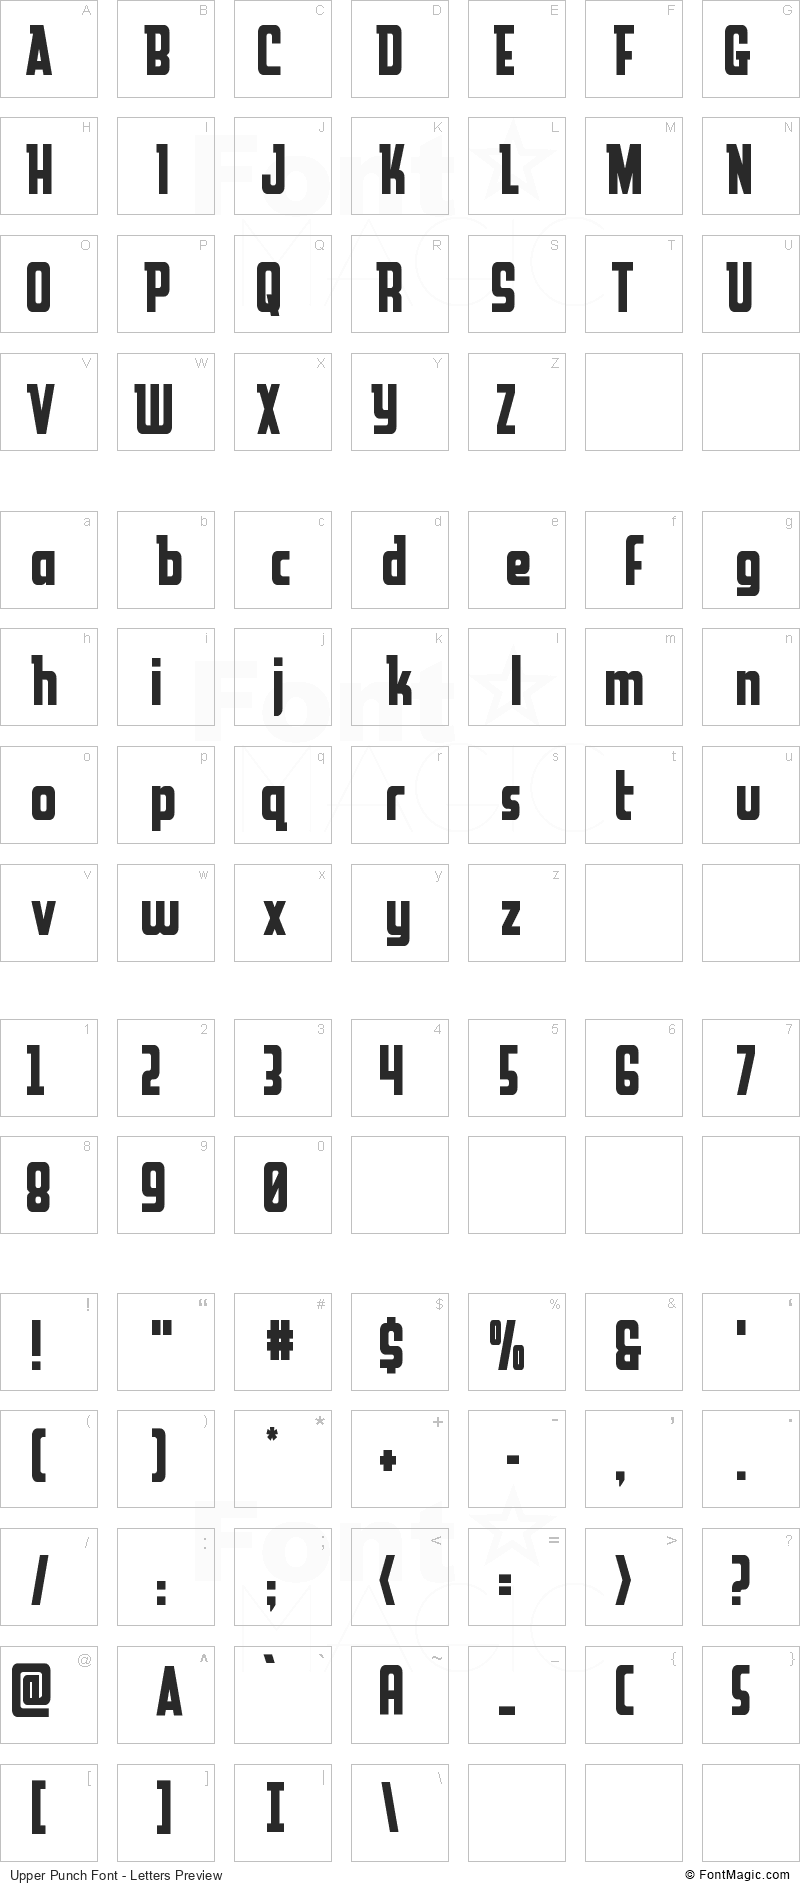 Upper Punch Font - All Latters Preview Chart